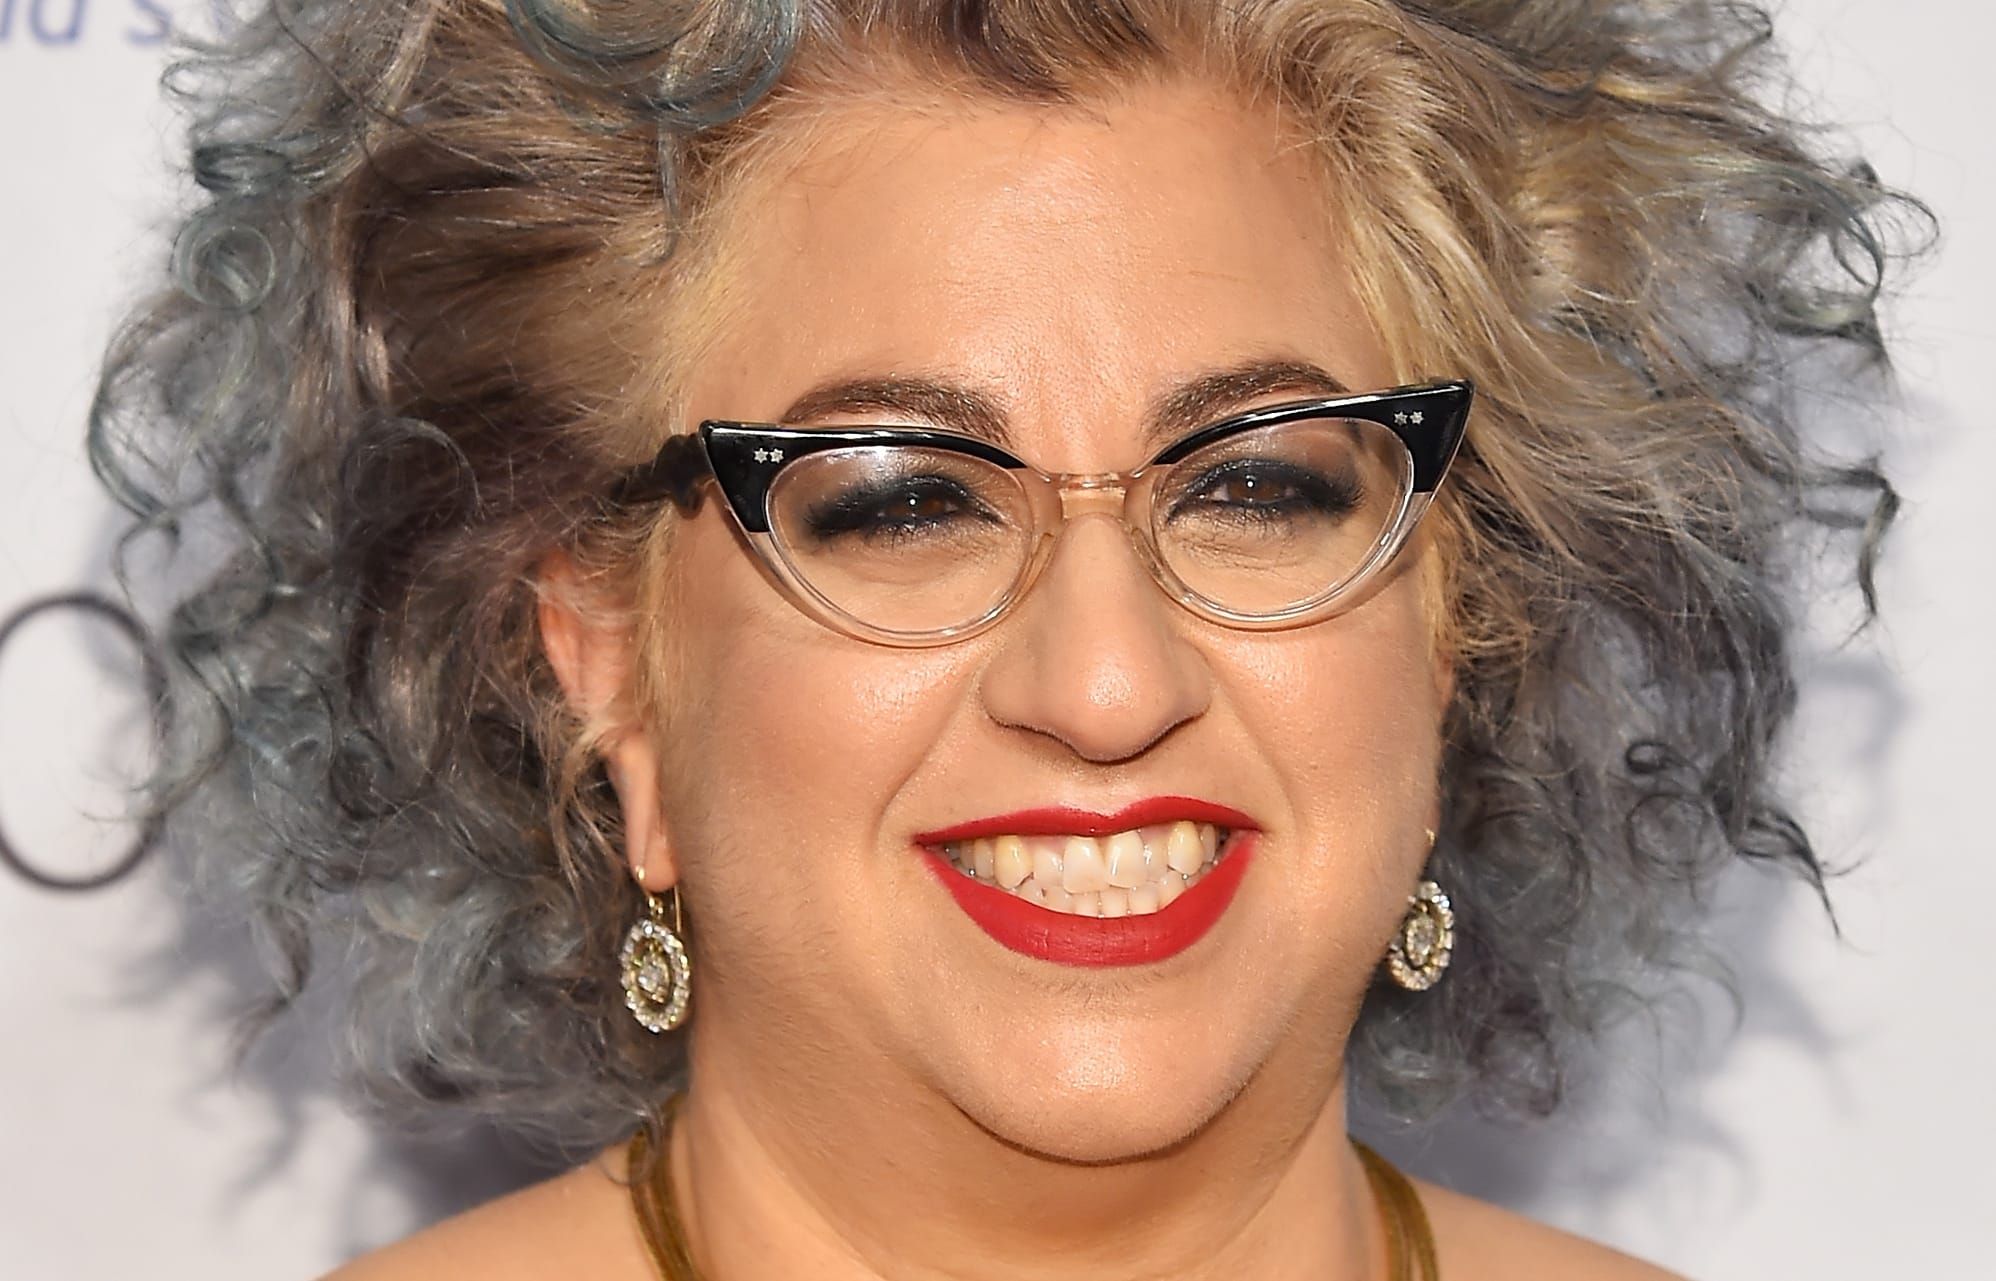 Television writer and producer Jenji Kohan, creator of the Showtime comedy-drama series Weeds and the Netflix comedy-drama series Orange Is the New Black.